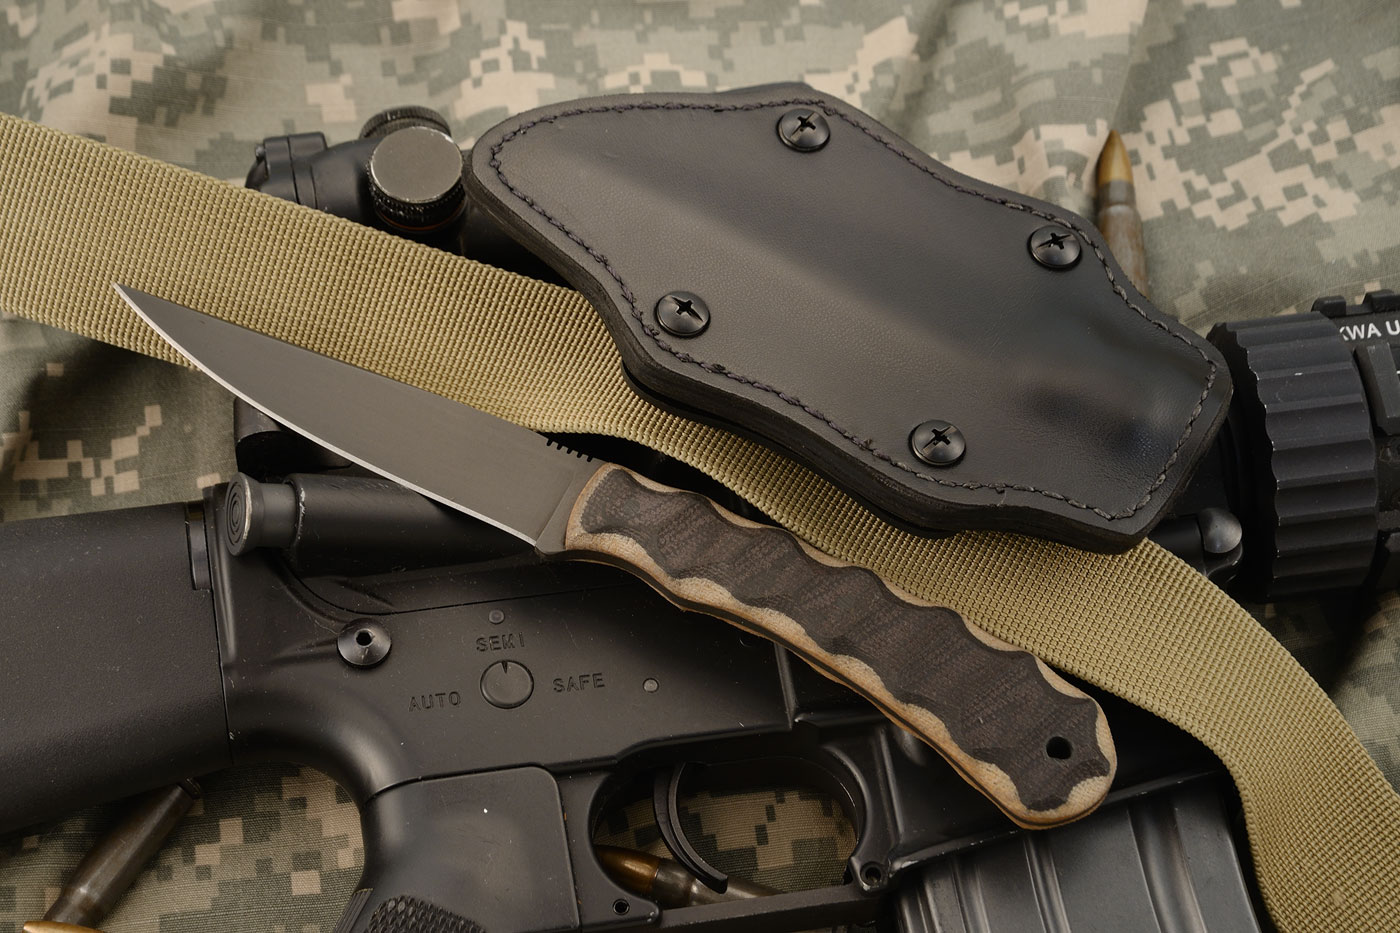 Operator with Sculpted Black and Brown Micarta (Wasp)